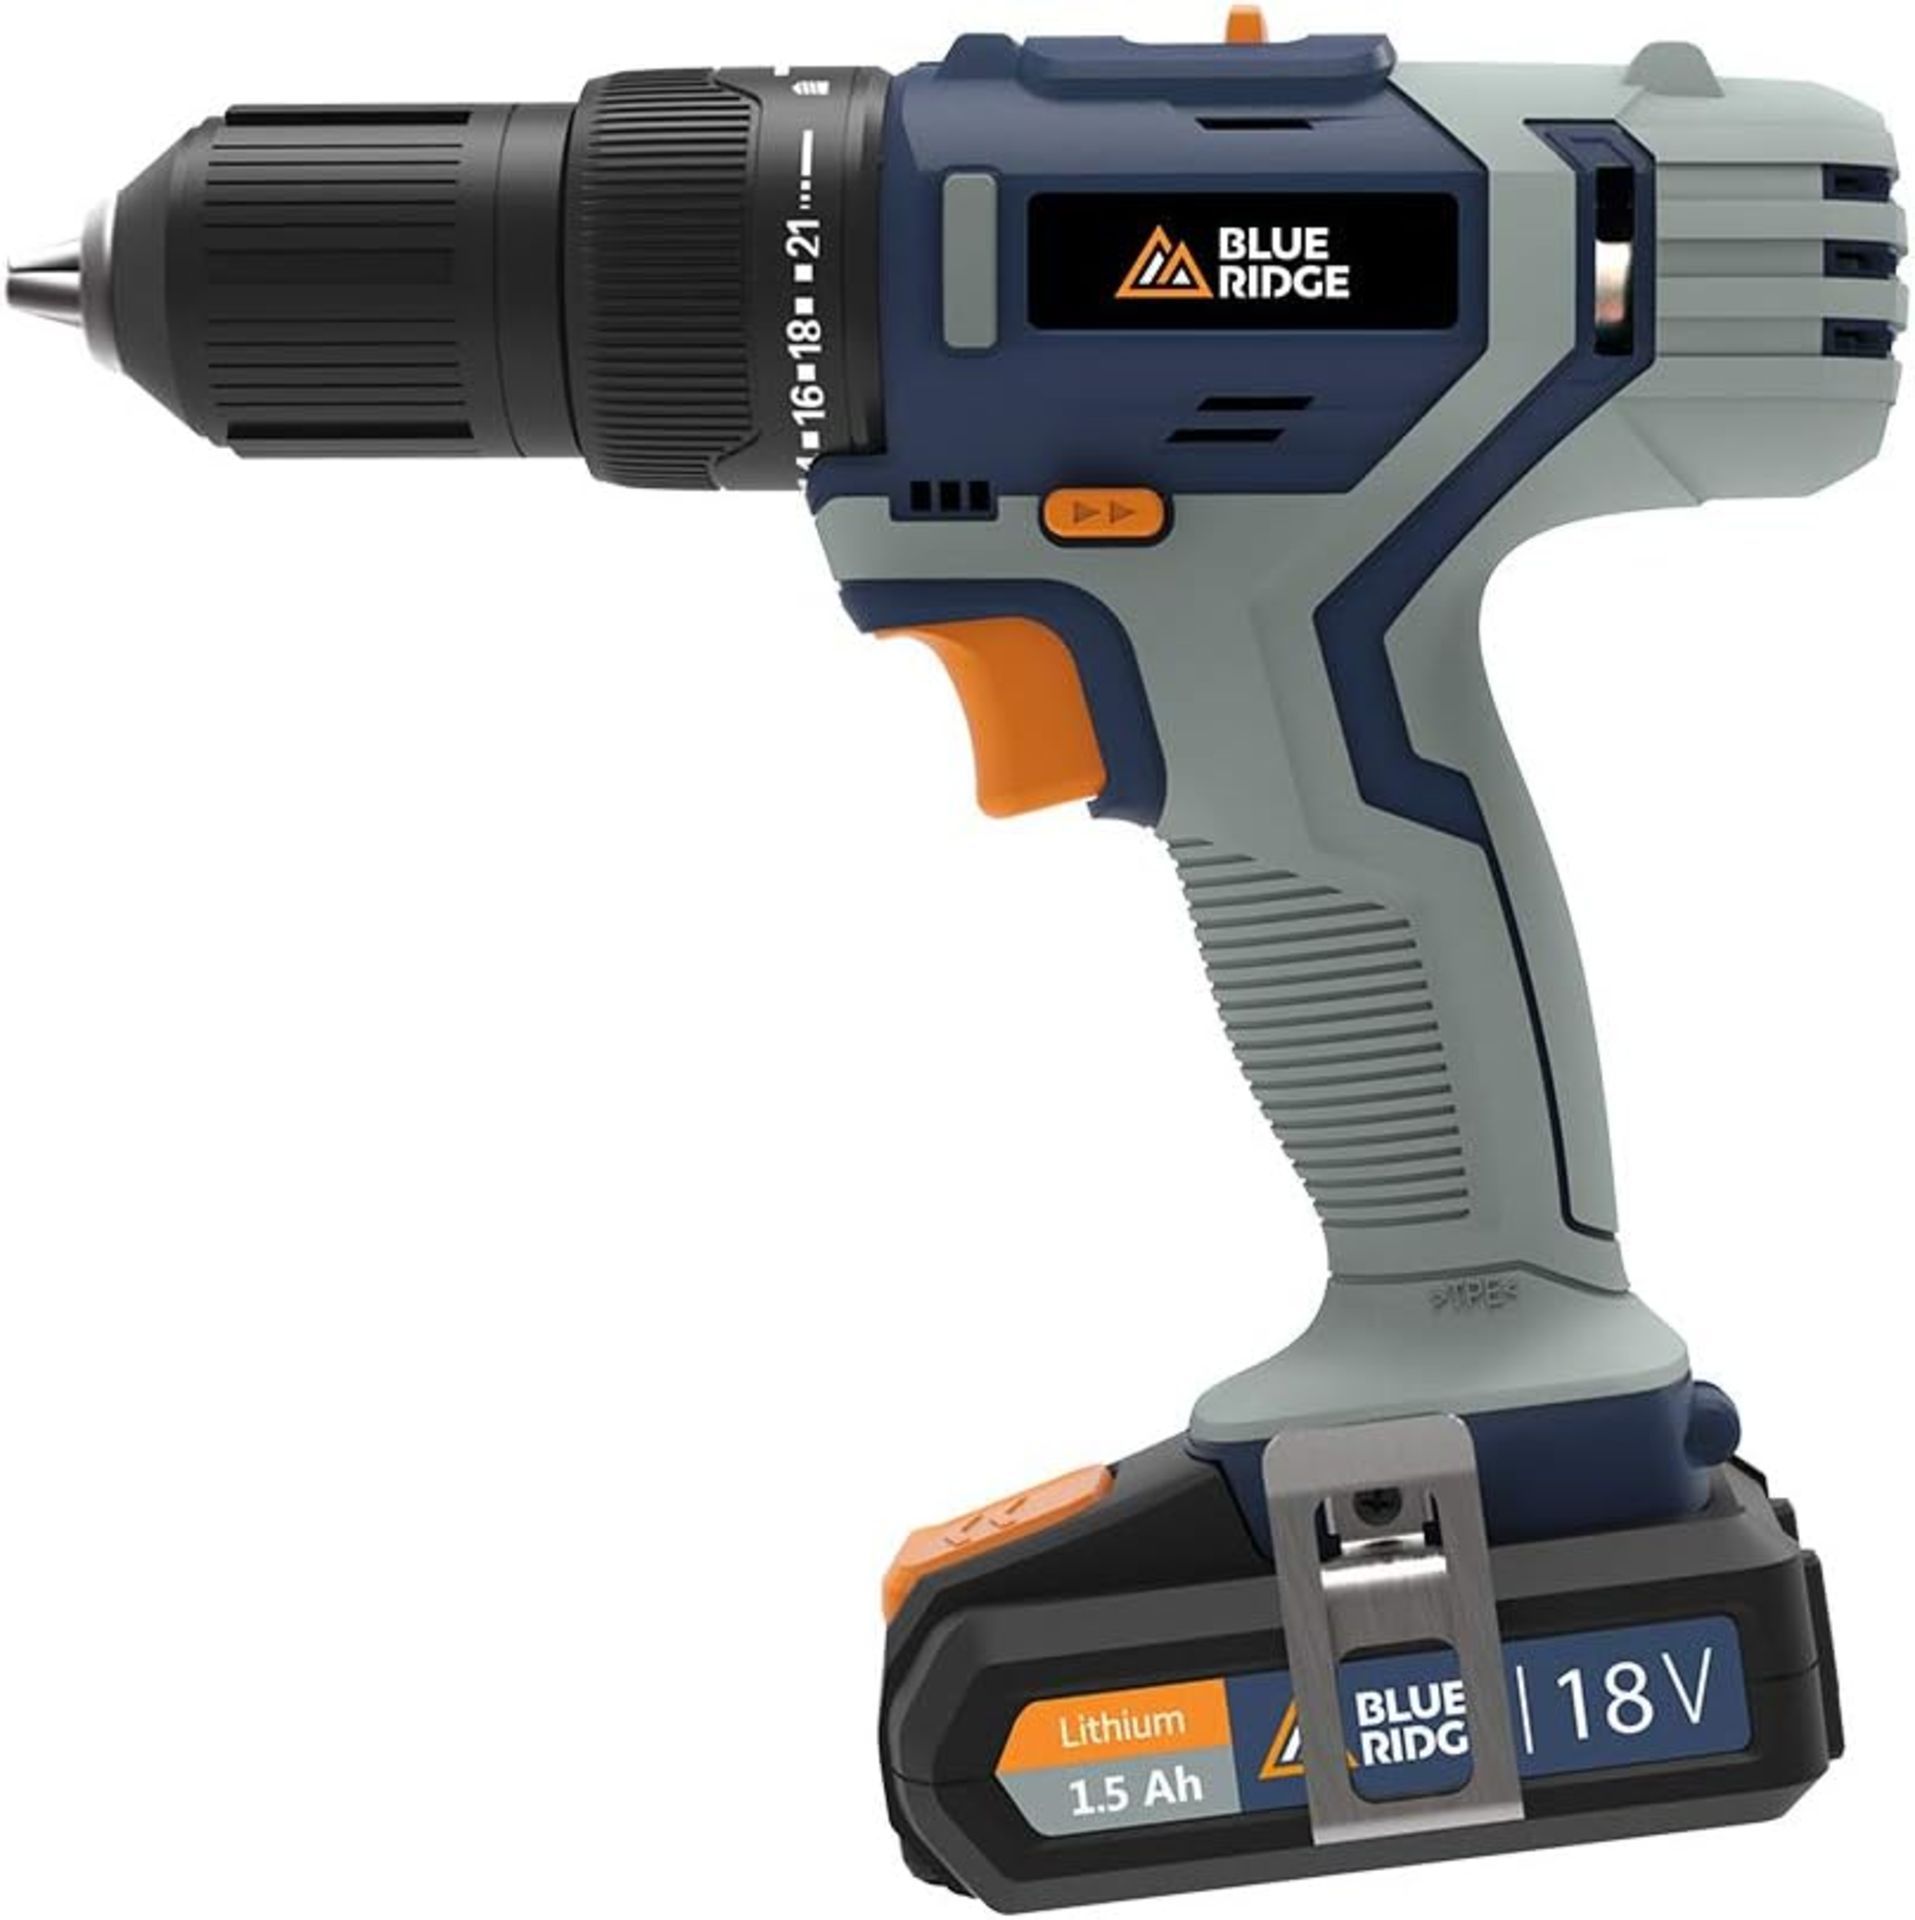 NEW & BOXED BLUE RIDGE 18V Cordless Hammer Drill with 2 x 1.5 Ah Li-ion Batteries & 43 Piece - Image 2 of 6